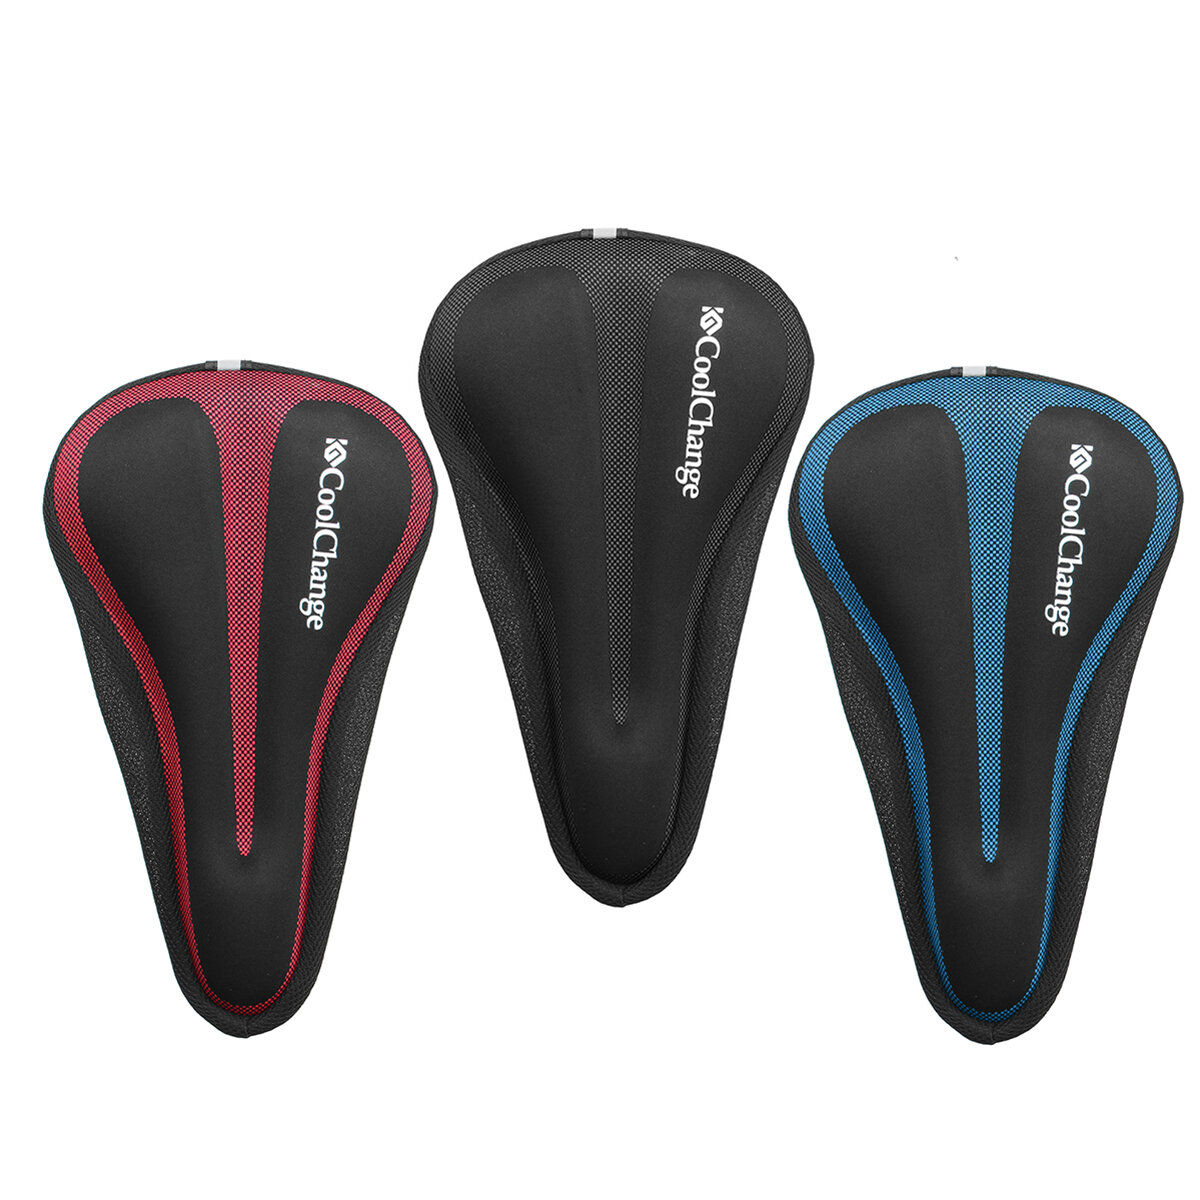 CoolChange Soft Breathable Bike Saddle Cushion Cover Shookproof Silicone Seat Pad For Road Bicycle MTB Bikes COD